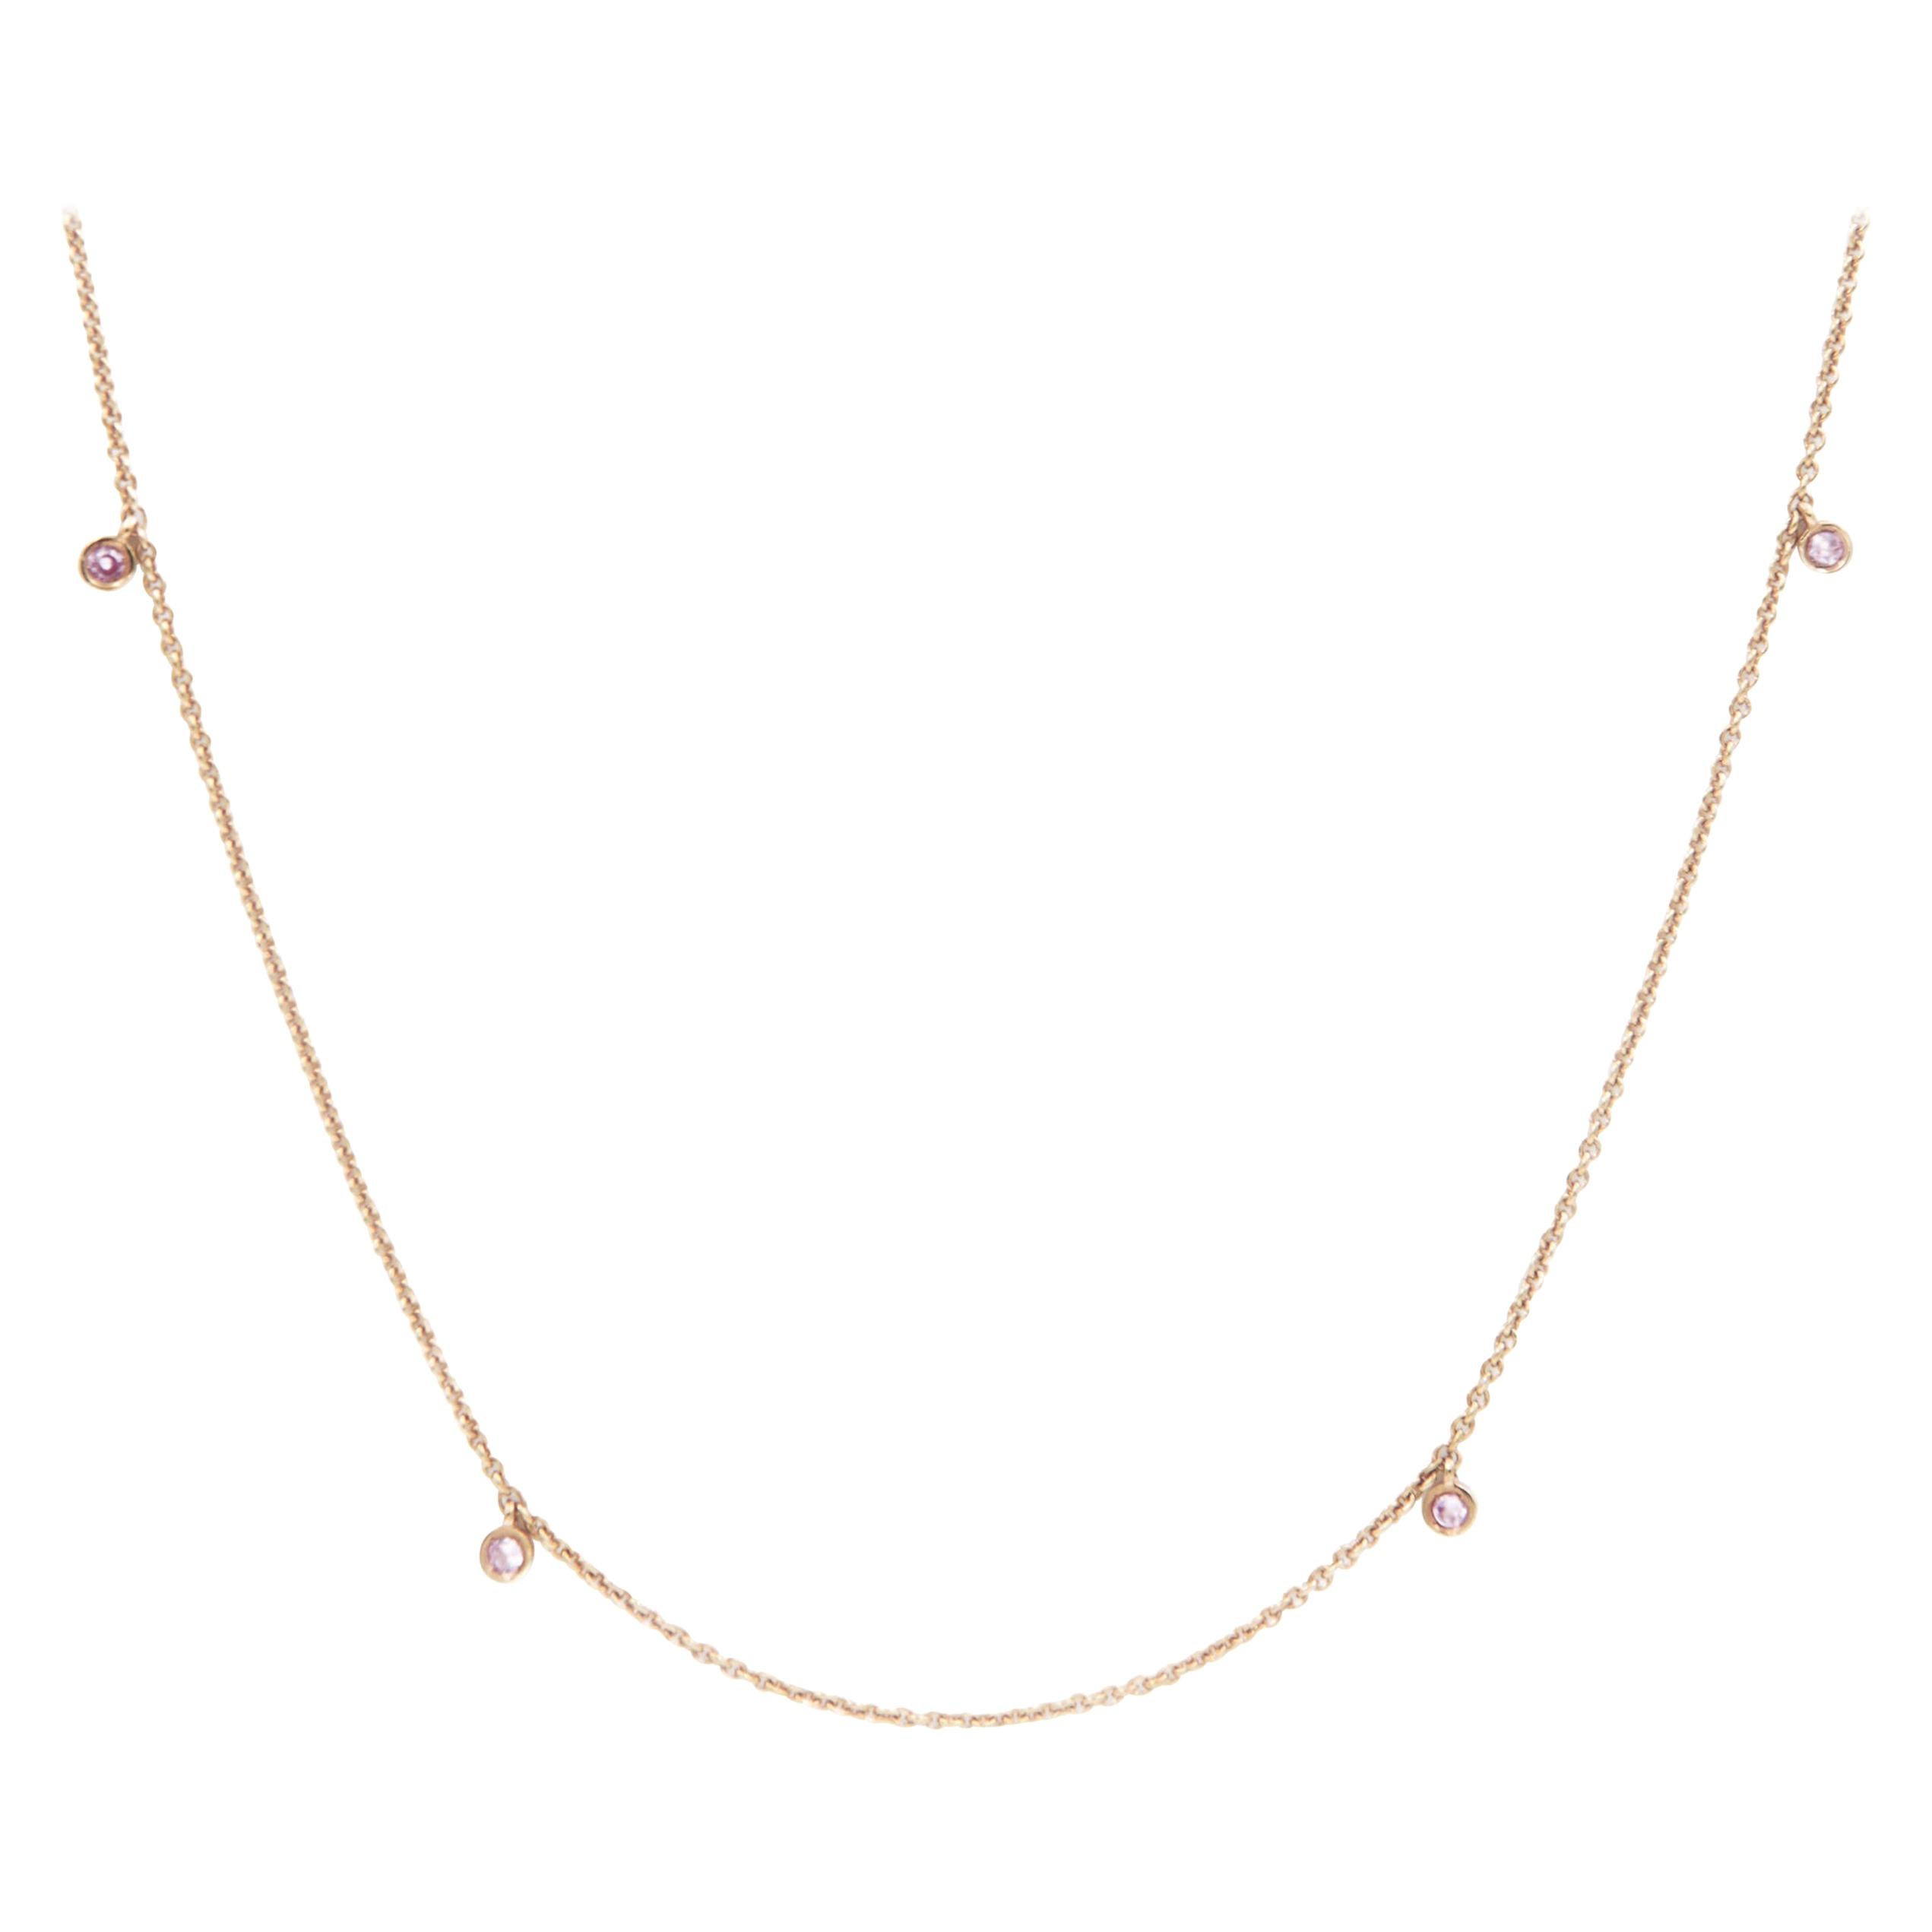 Julia-Didon Cayre 18 Karat Yellow Gold Pink Sapphire Chain Necklace For Sale